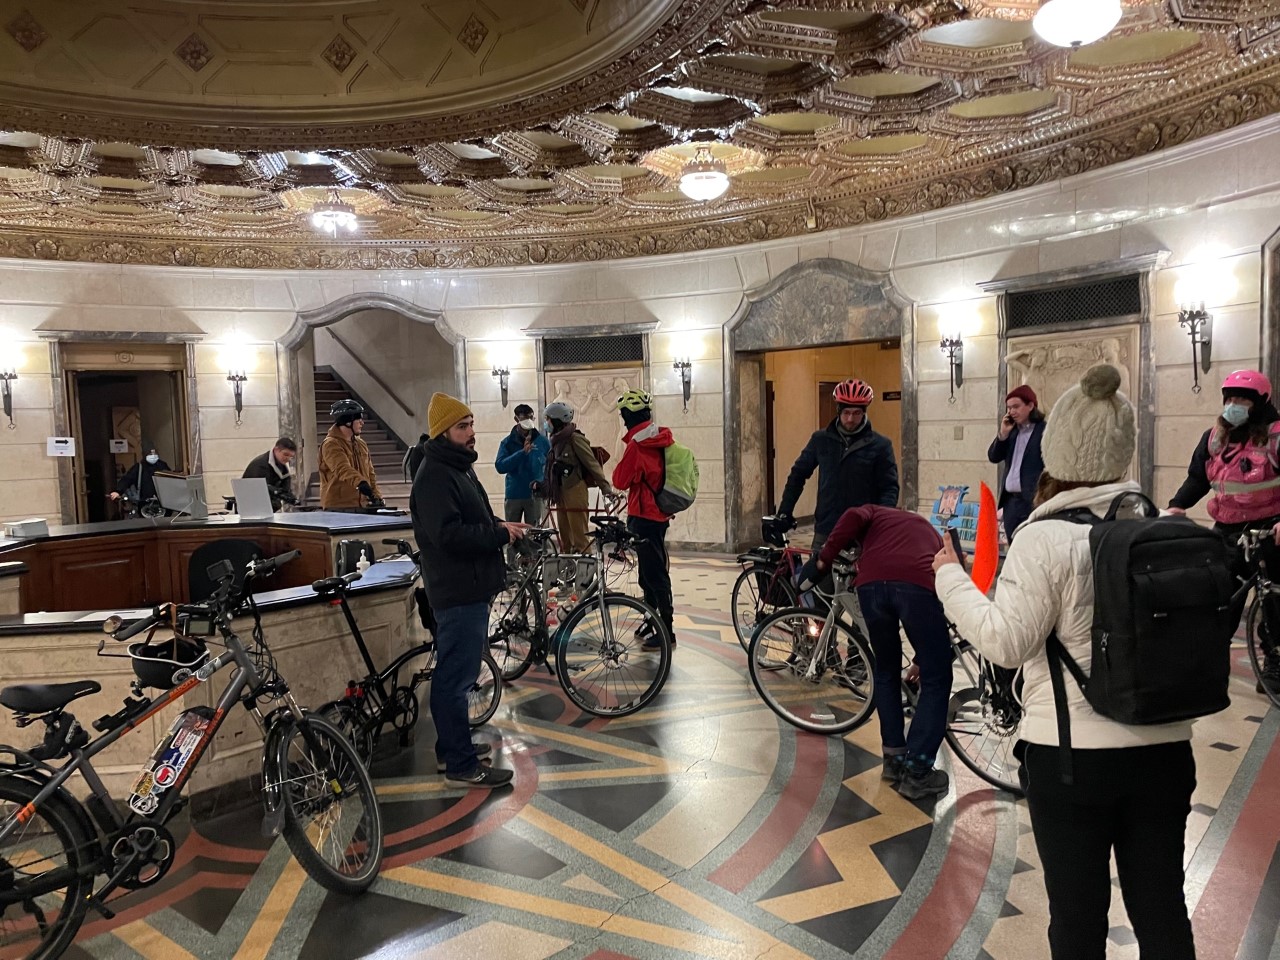 People arrive by bike at the Garfield Park Field House. Photo: Cameron Bolton